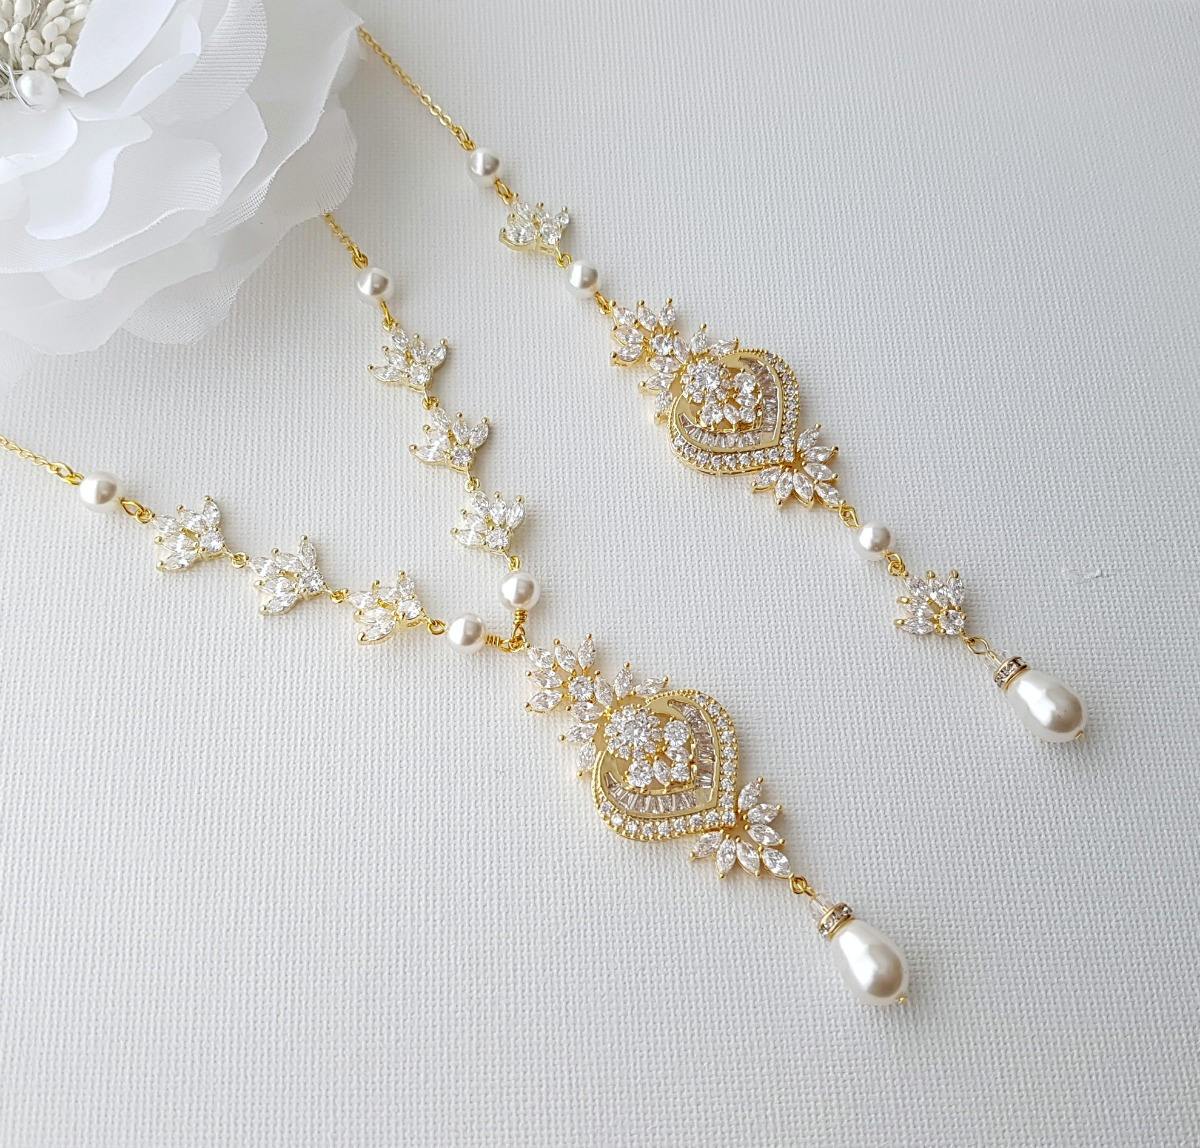 Gold Backdrop Bridal Necklace, Wedding Back Necklace, Crystal Backdrop Necklace, Swarovski Pearls, Rose Gold, Bridal Jewelry, Rosa - PoetryDesigns